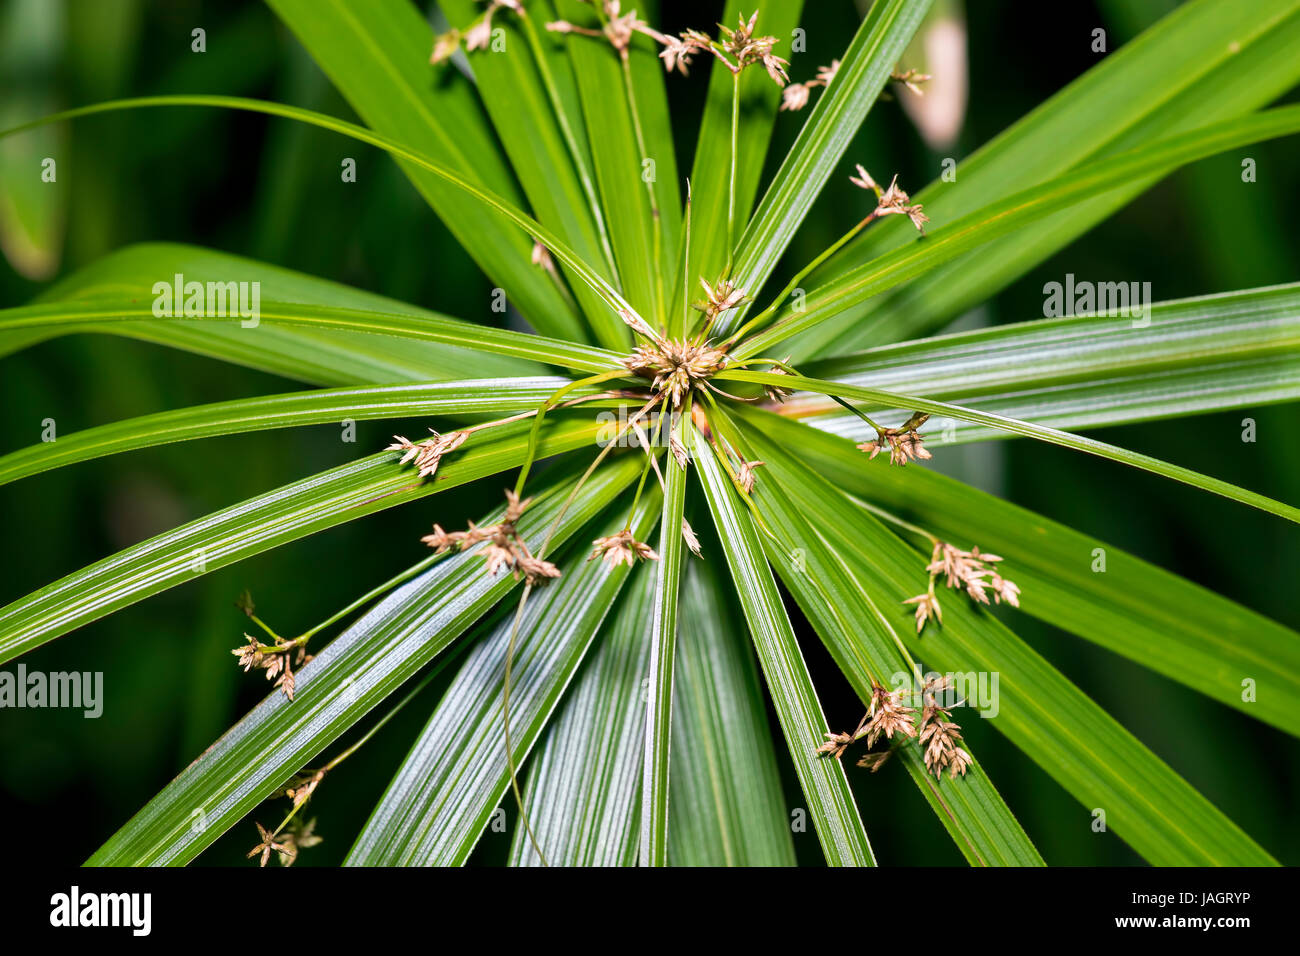 Closeup of a beautiful Cyperus papyrus plant head. Cyperus papyrus is a species of aquatic flowering plant belonging to the sedge family Cyperaceae. Stock Photo